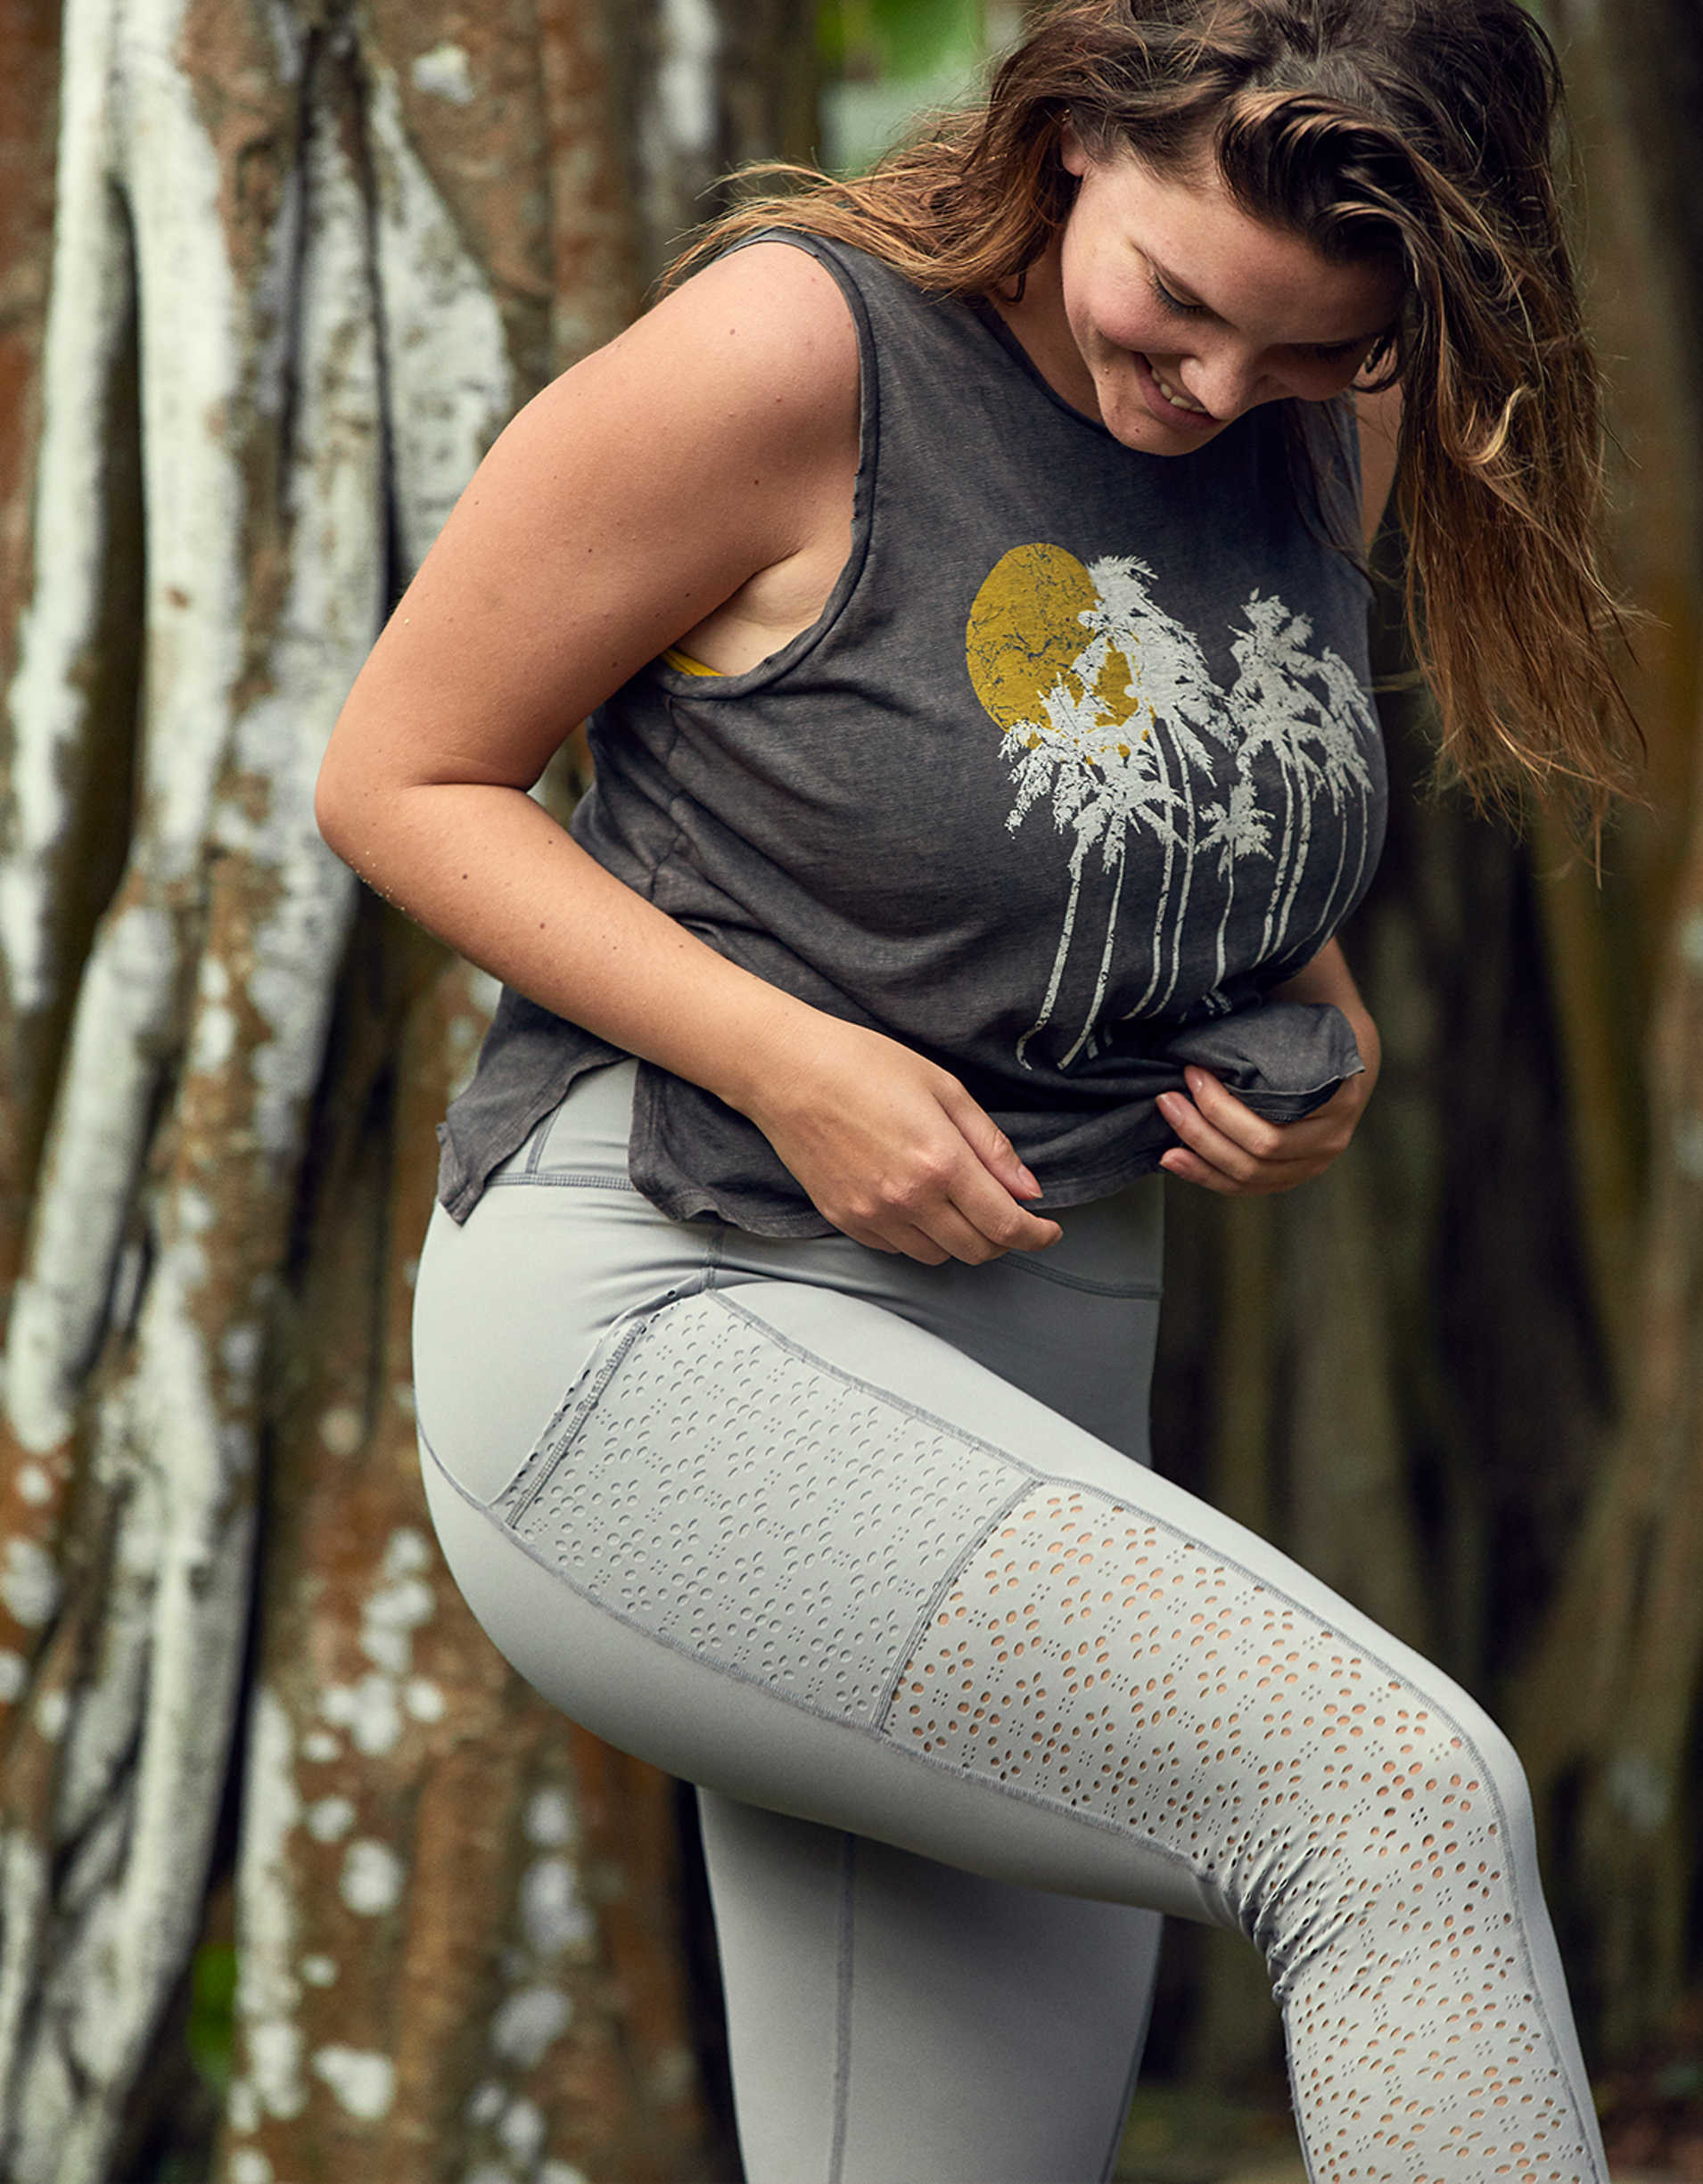 Model wearing leggings outside showing the side with a pocket and laser-cut pattern from the hip down to the ankle